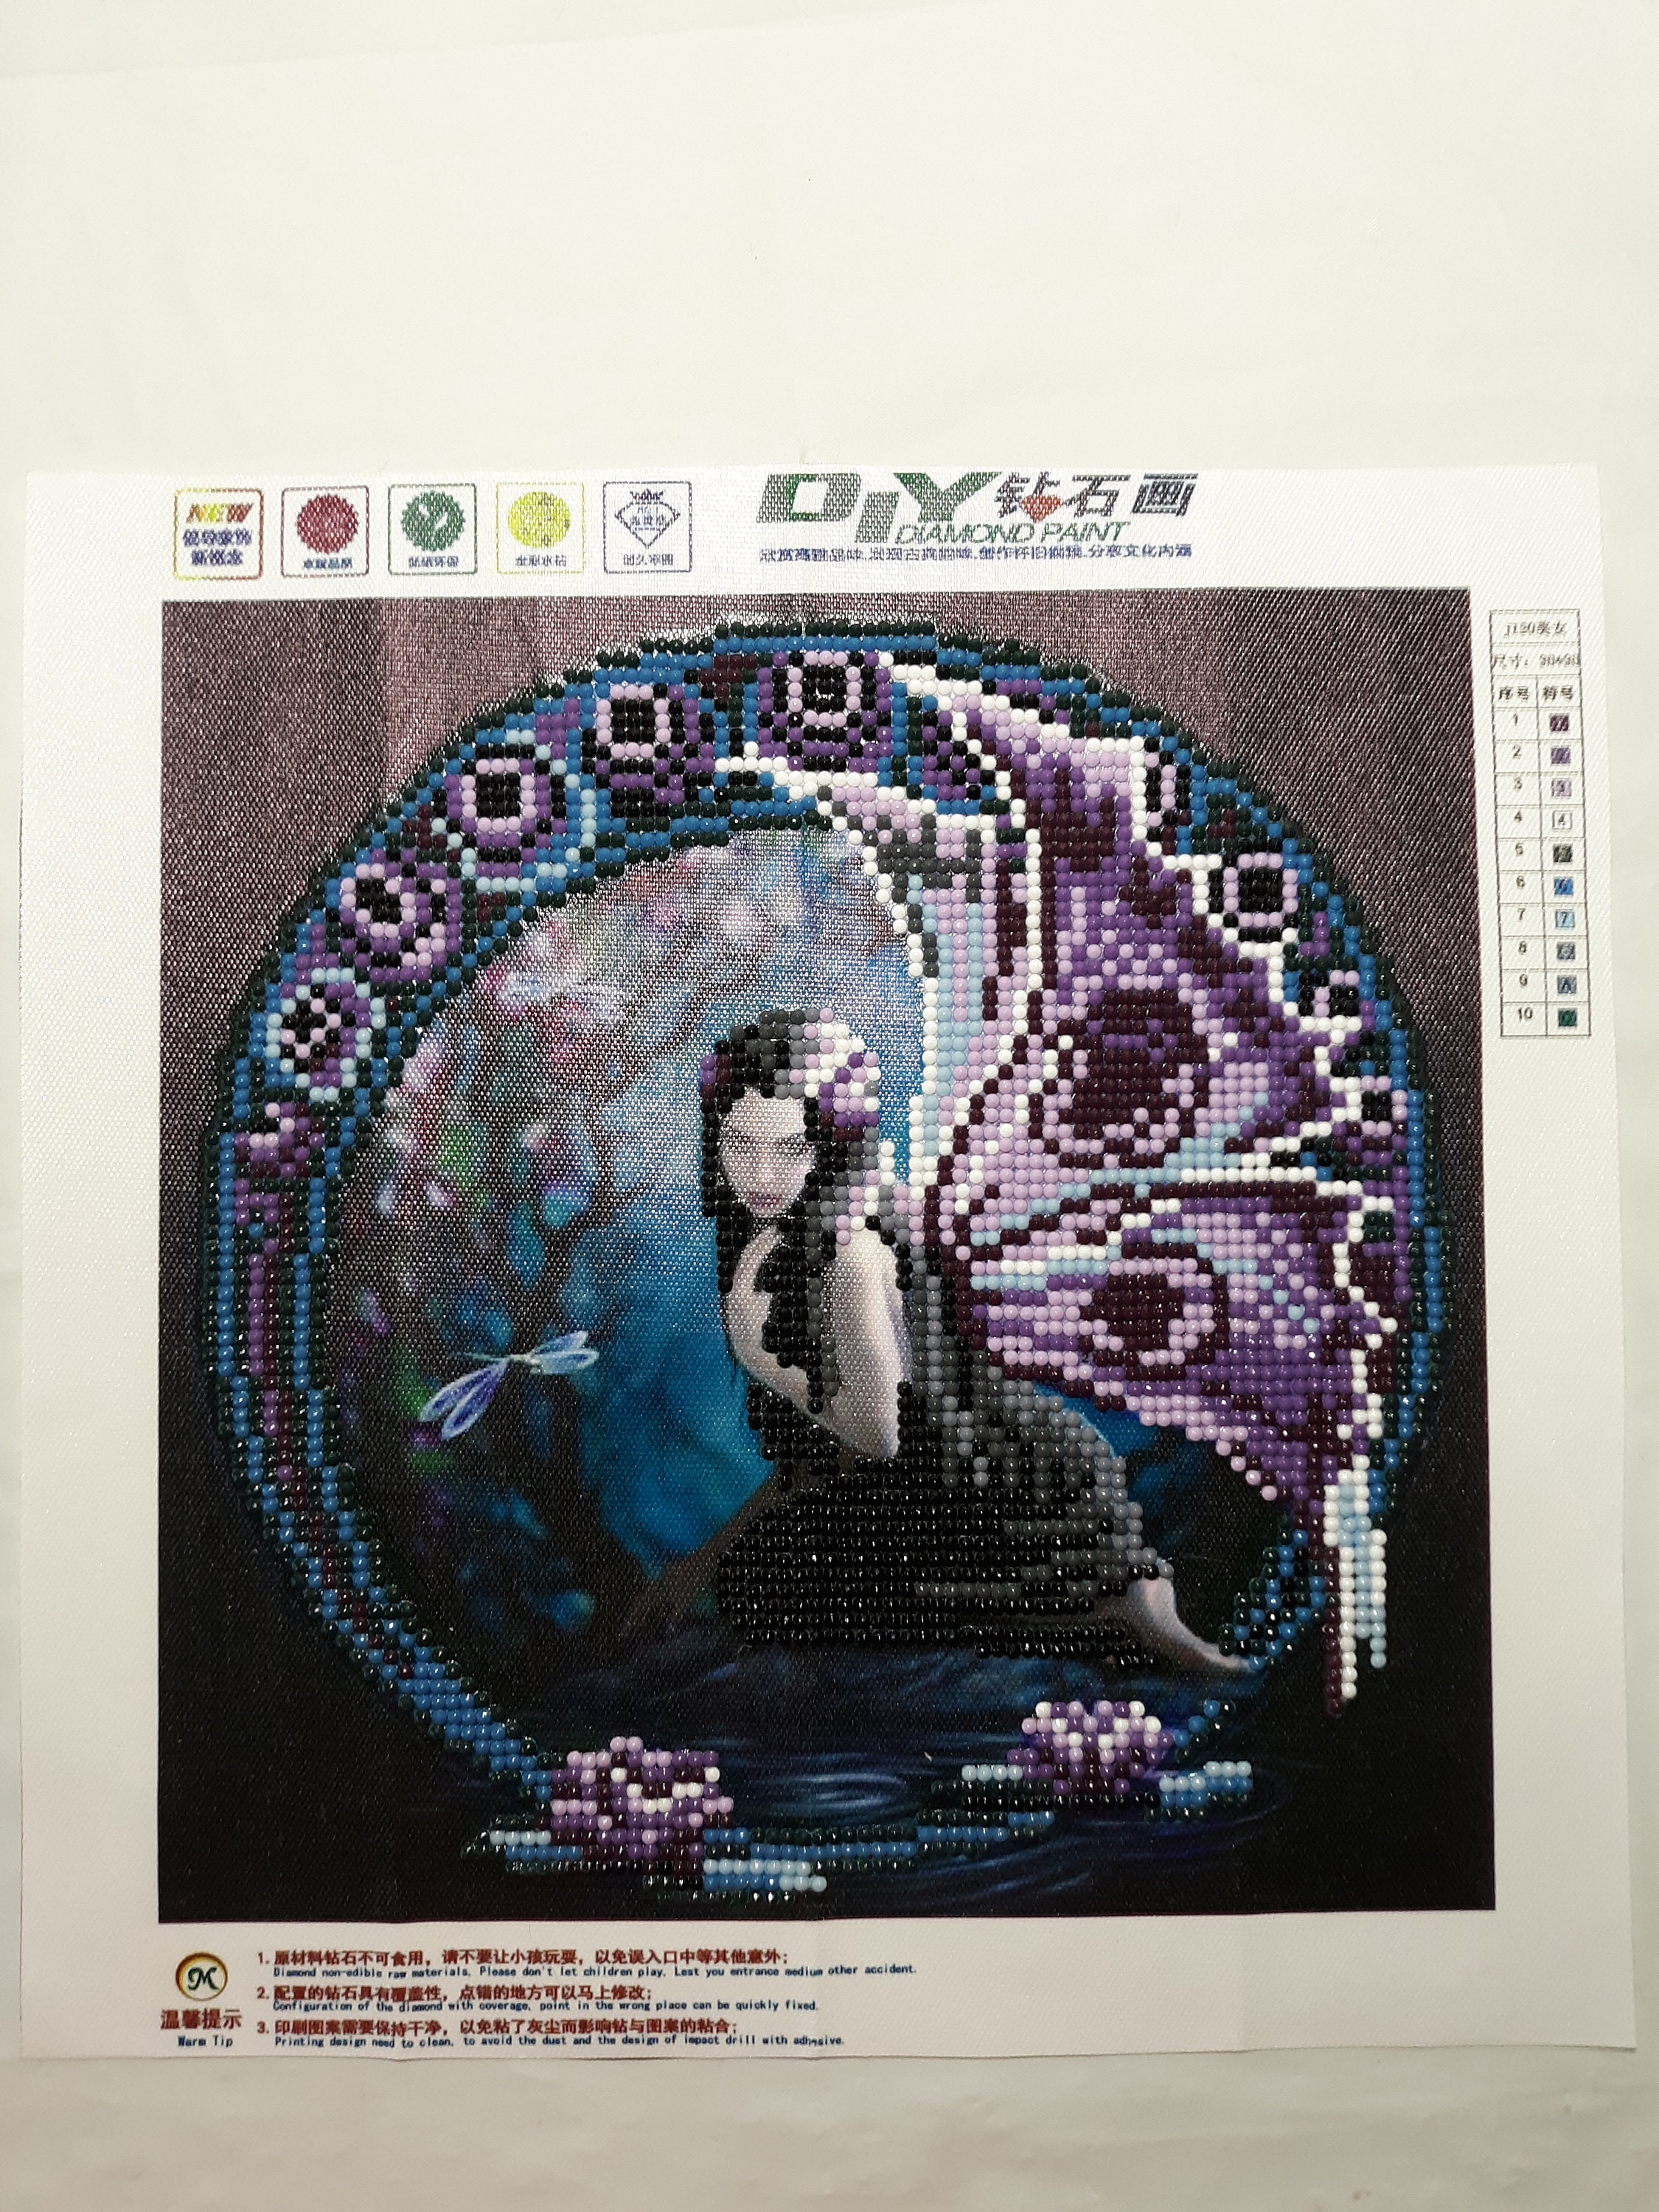 Black Horse in Water Completed 5D Diamond Painting 